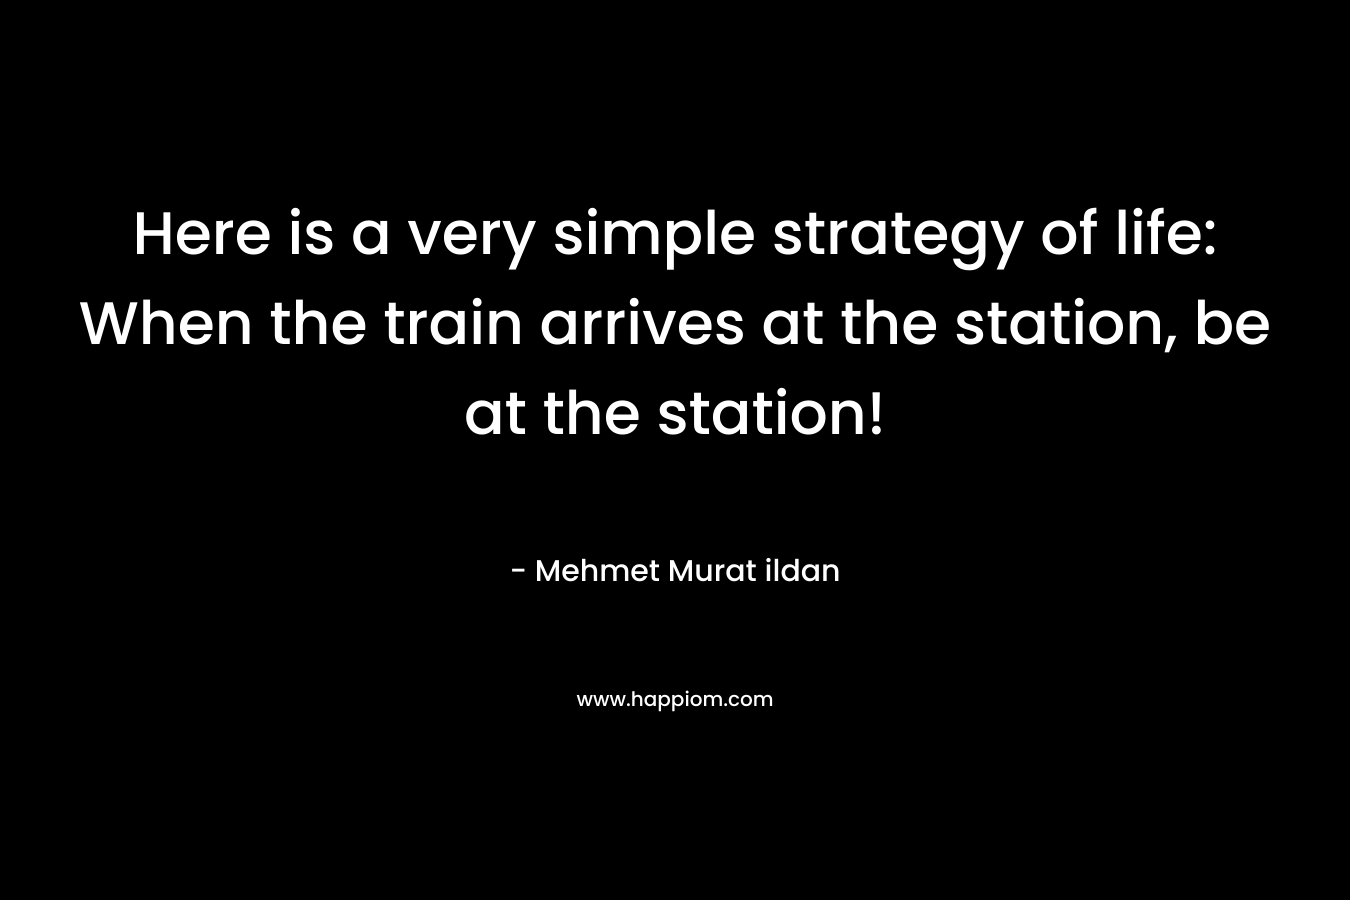 Here is a very simple strategy of life: When the train arrives at the station, be at the station!